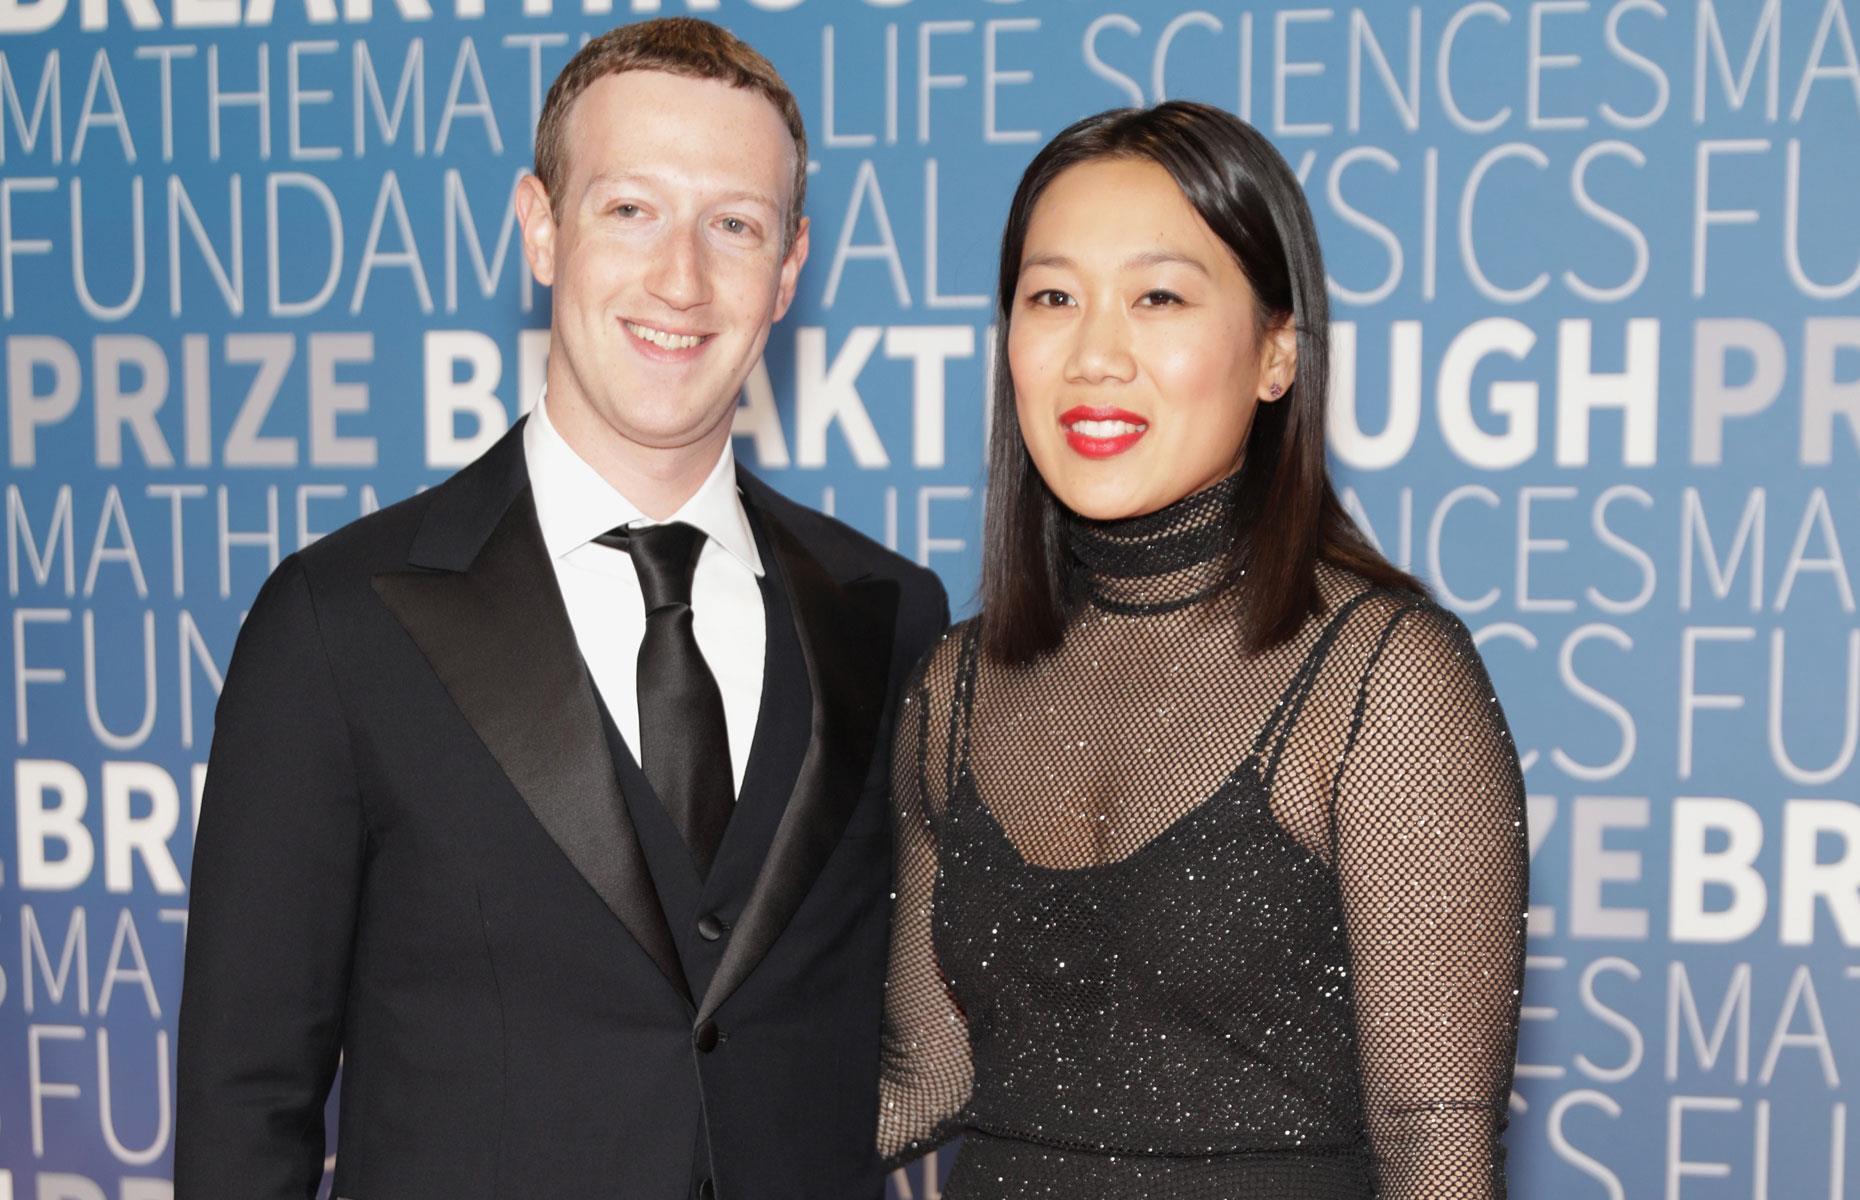 <p>Once the third-richest person on the planet, Facebook co-founder Mark Zuckerberg has dropped down the rankings considerably but still boasts a net worth of $64.9 billion.</p>  <p>The social network billionaire shares his fortune with wife Priscilla Chan and their two daughters Max and August Zuckerberg, and is planning to give a sizable portion of it to charity.</p>